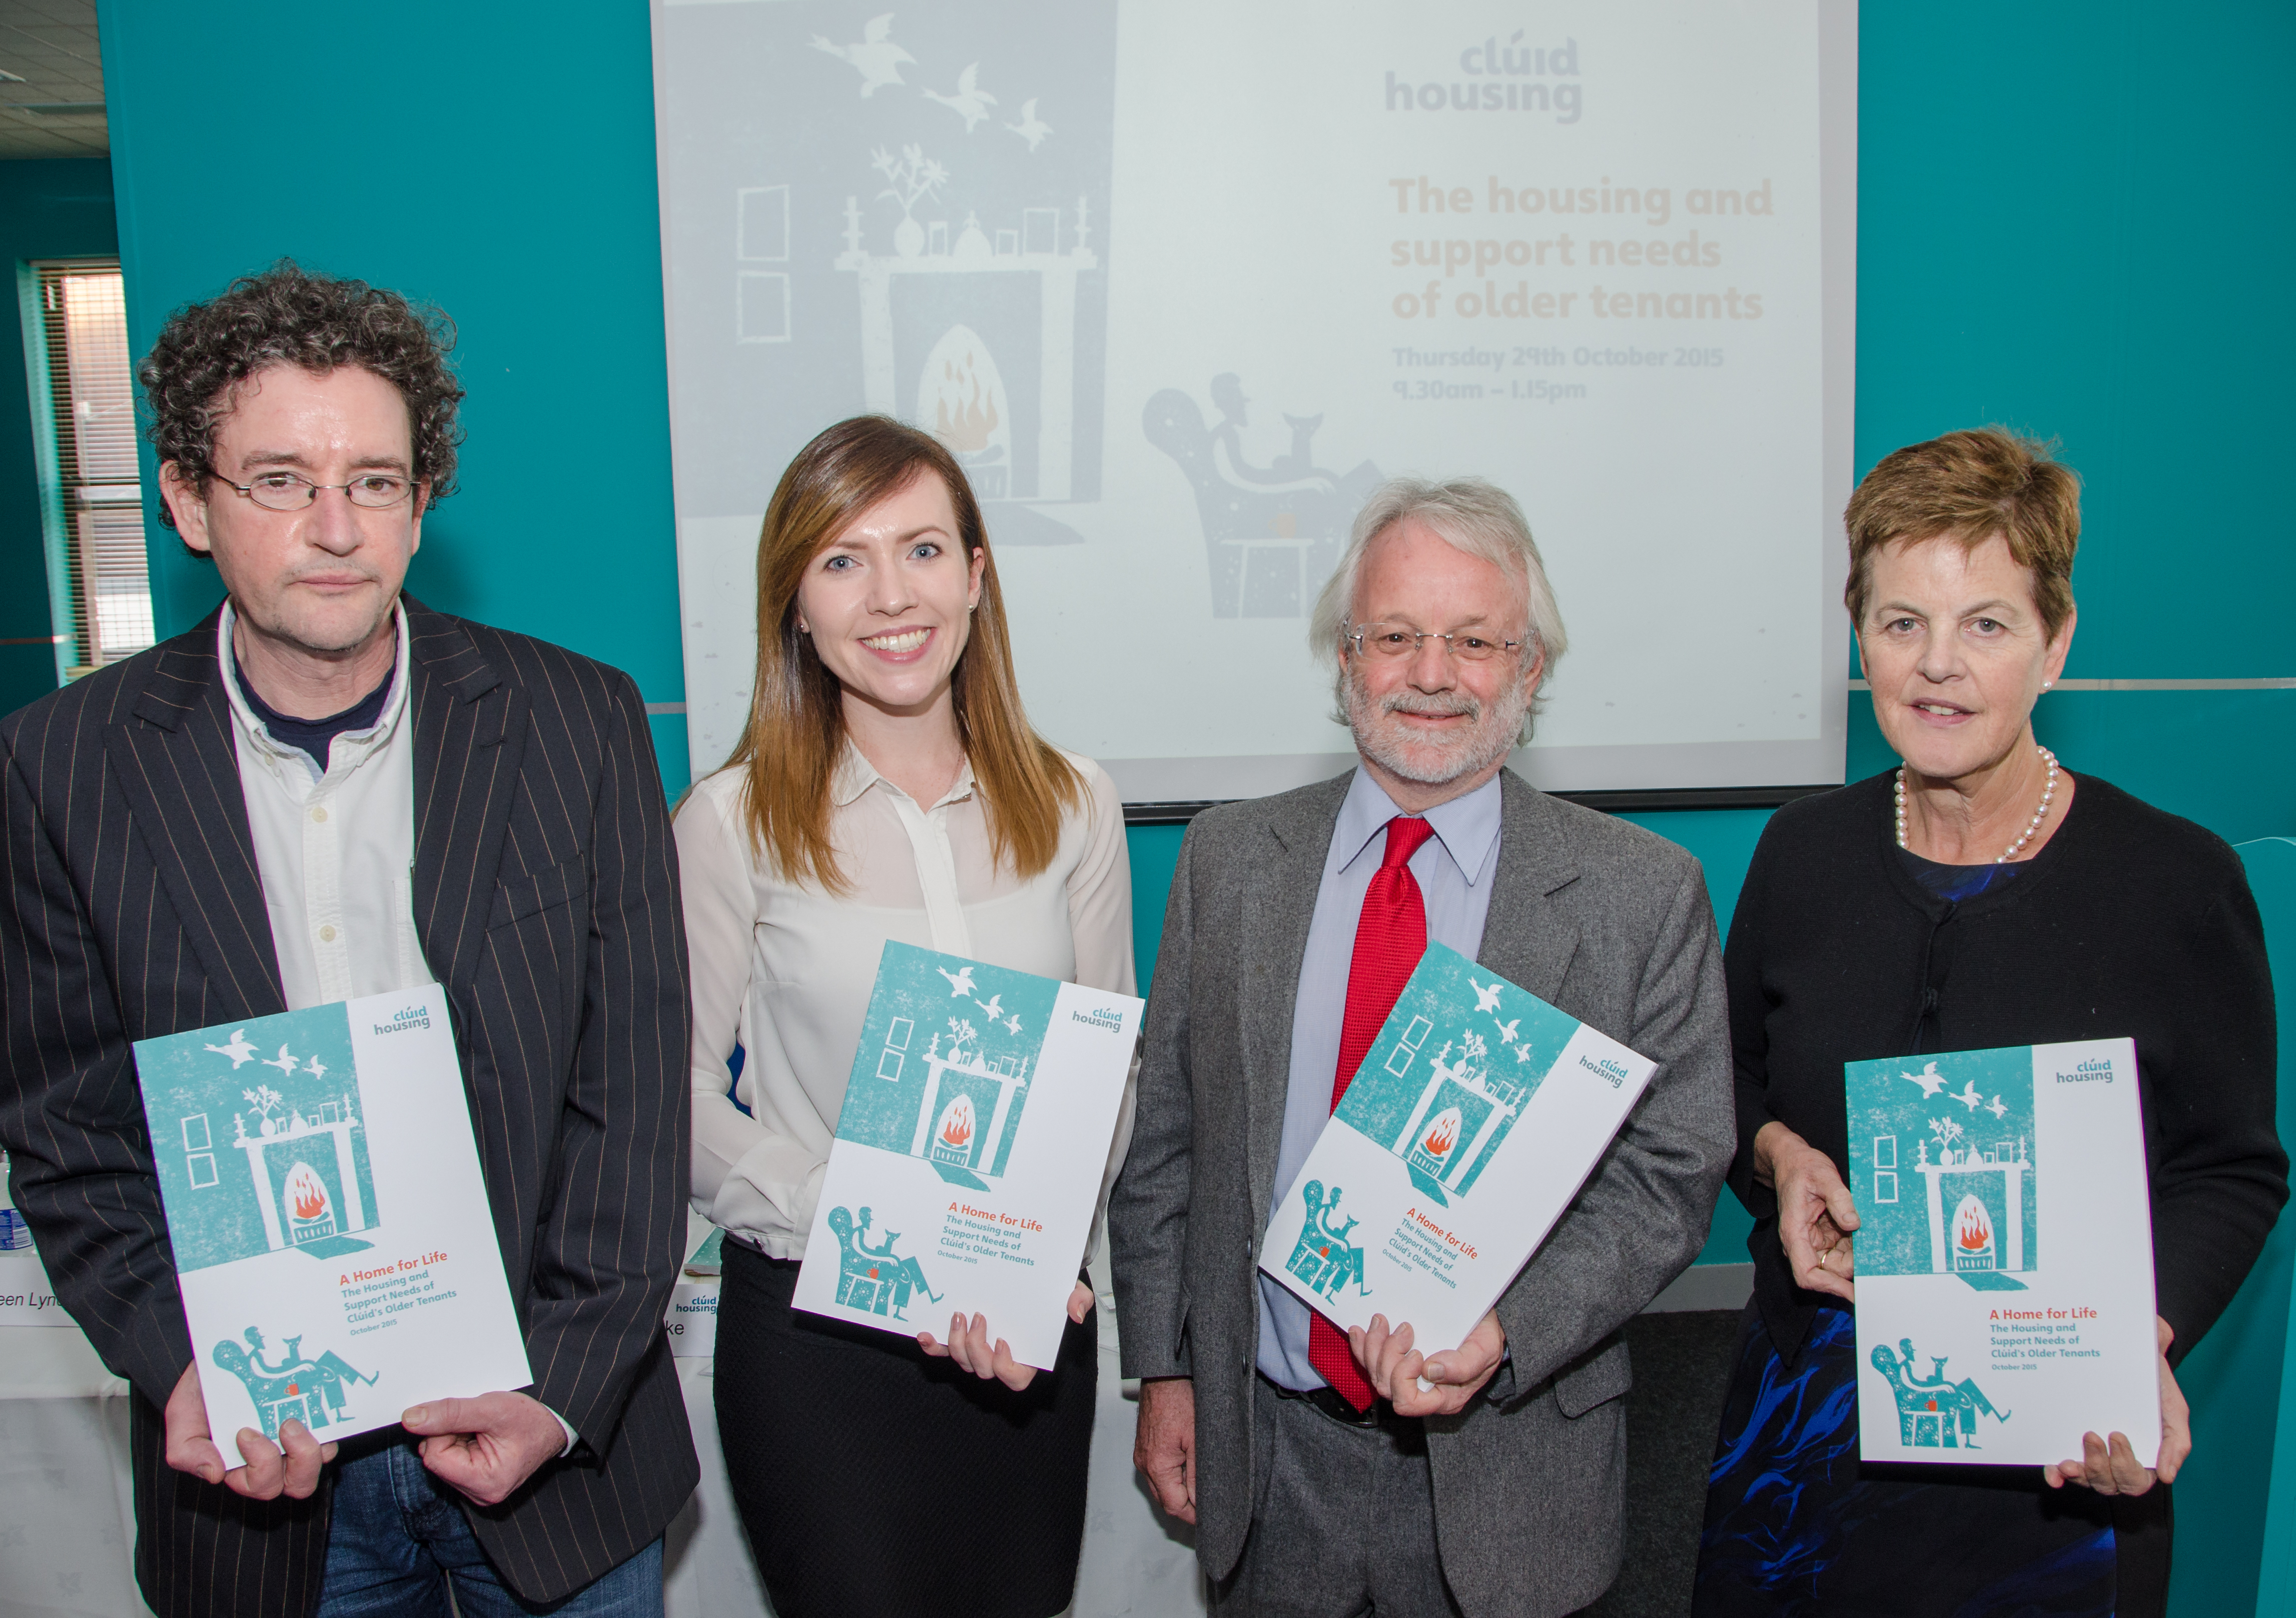 The Official Launch of the 'A Home for Life' Report took place on 29th October 2015.